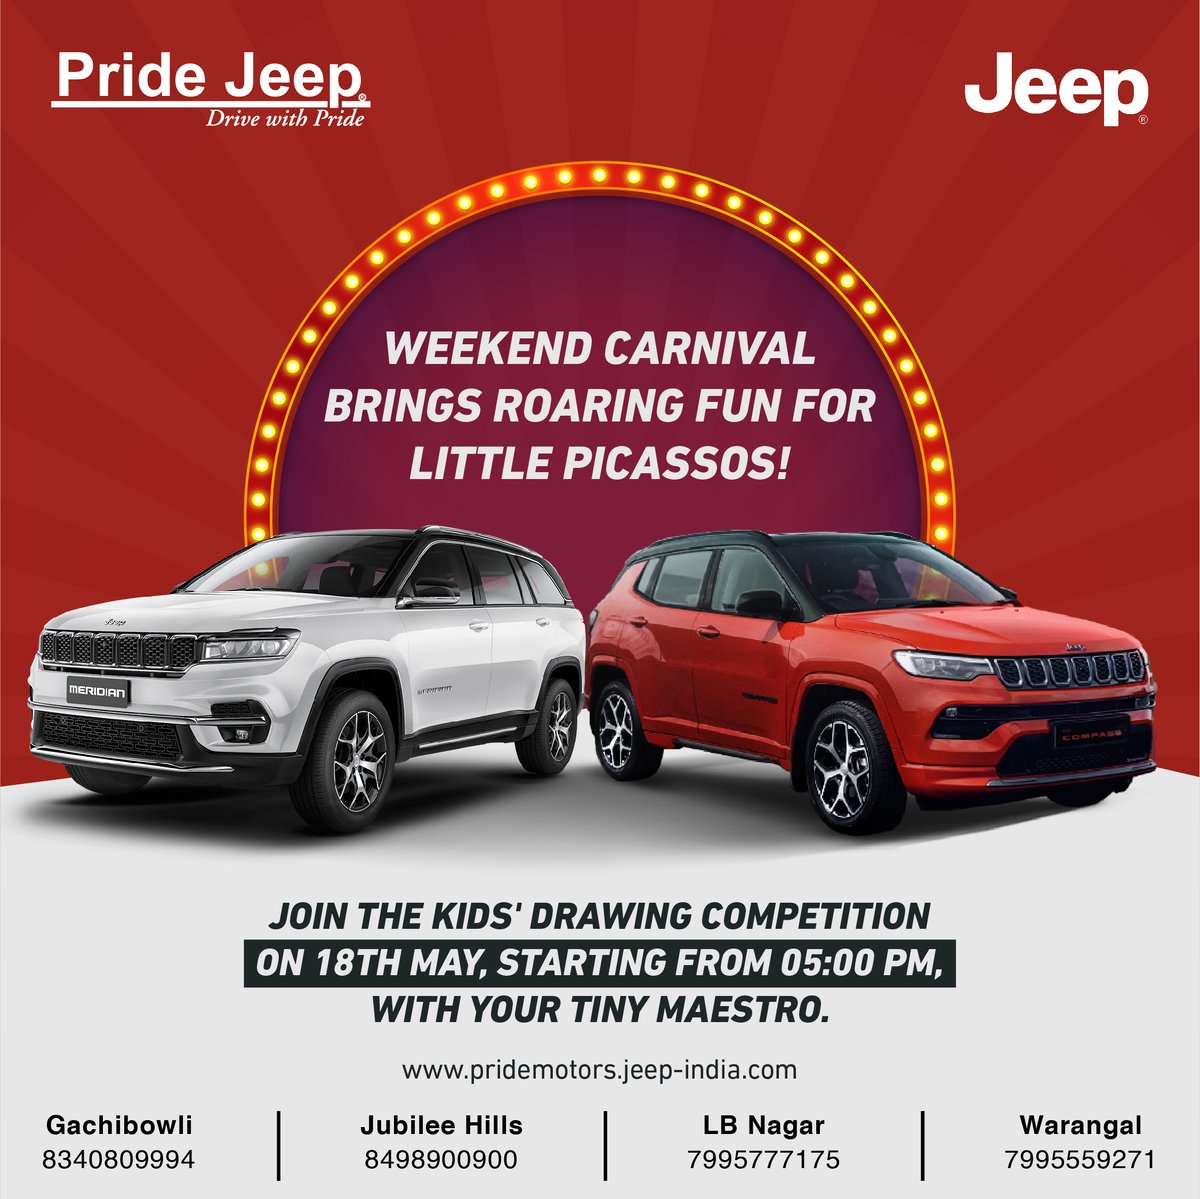 This weekend, unleash a burst of creativity with a kaleidoscope of colours! Encourage your little Picassos to join the Kids Drawing Competition, an event that promises fun and engagement for all.

#Pridejeep #PrideJeepHyderabad #weekendcarnival #drawingcompetition #drawing